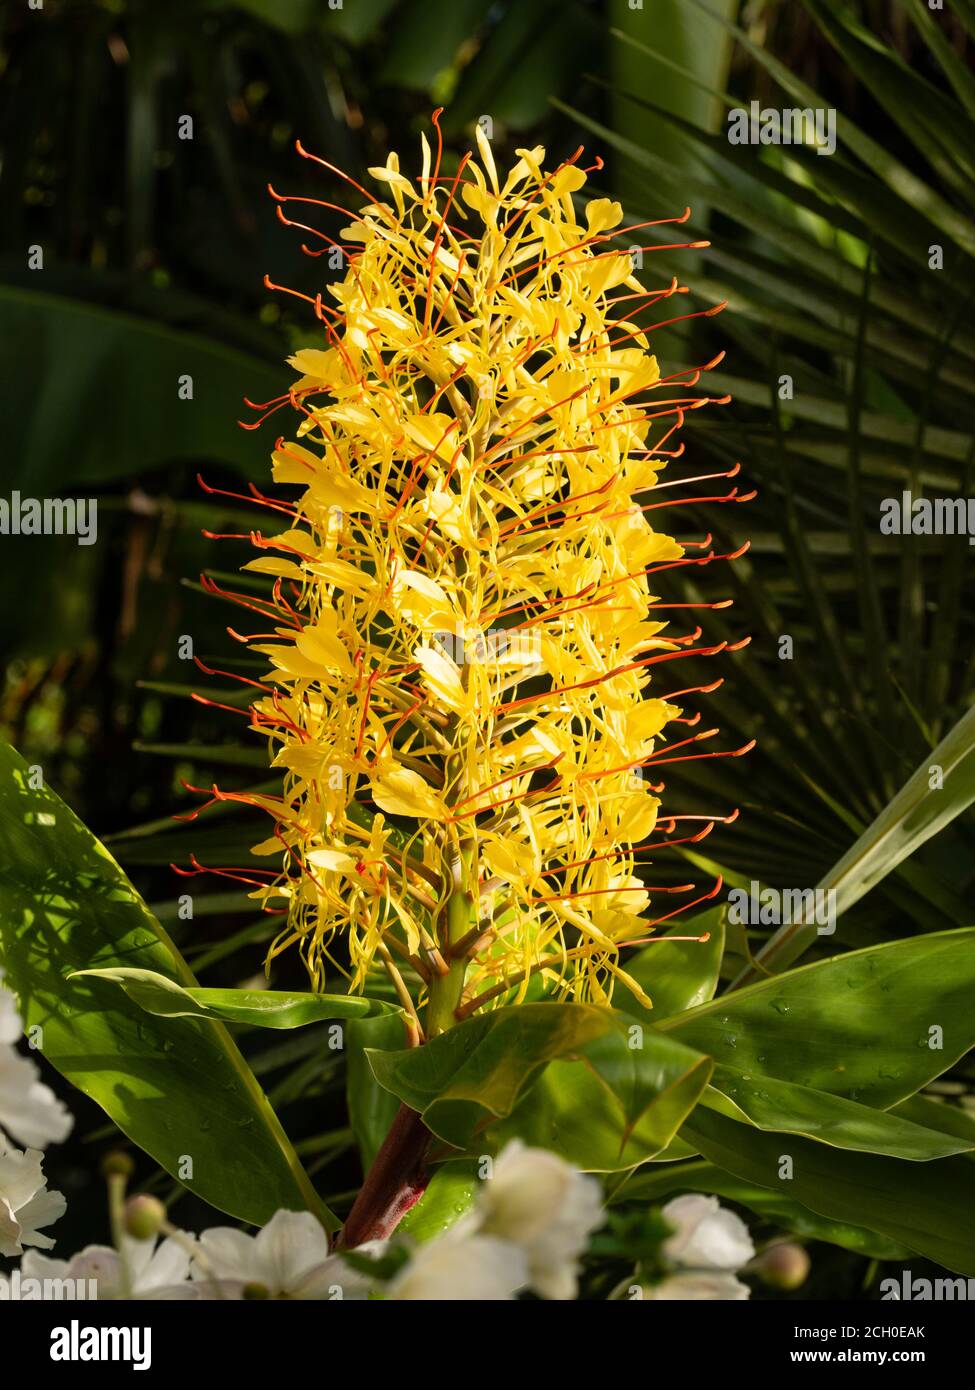 Flower spike of the exotic Kahili ginger, Hedychium gardnerianum, in a UK garden Stock Photo